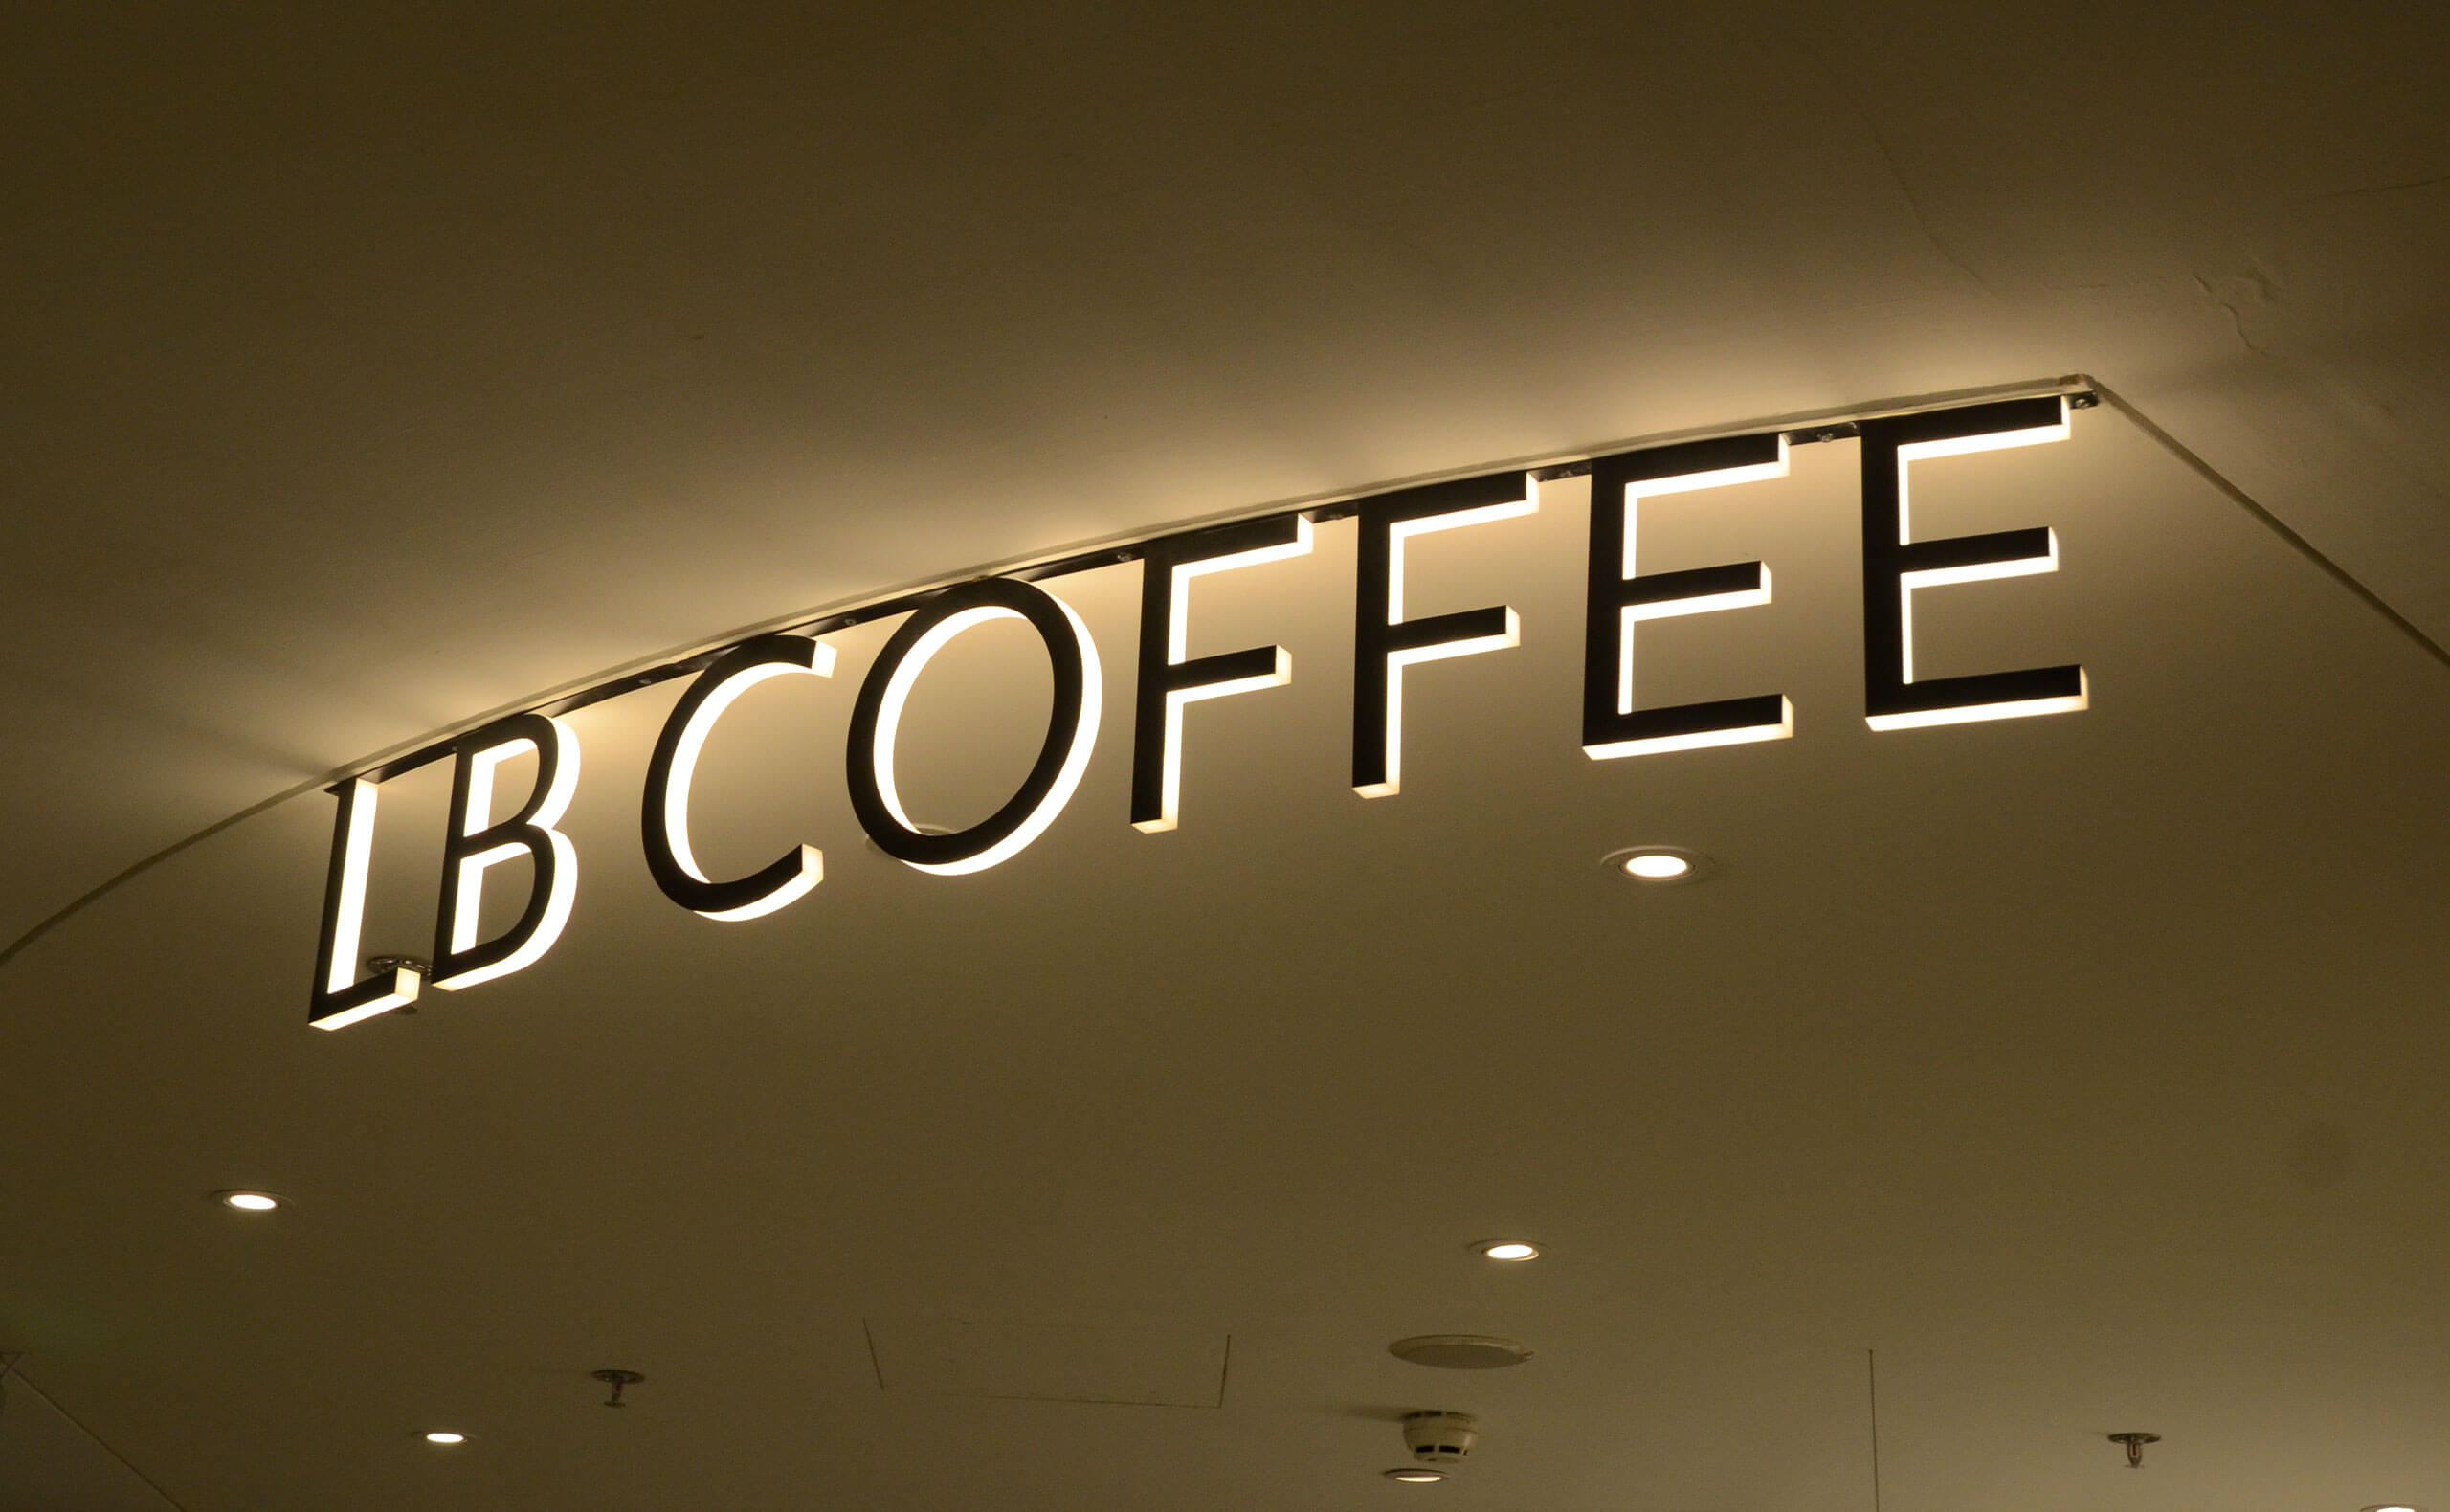 Side Lit Channel Letters With Metal Front Surface For Lb Coffee